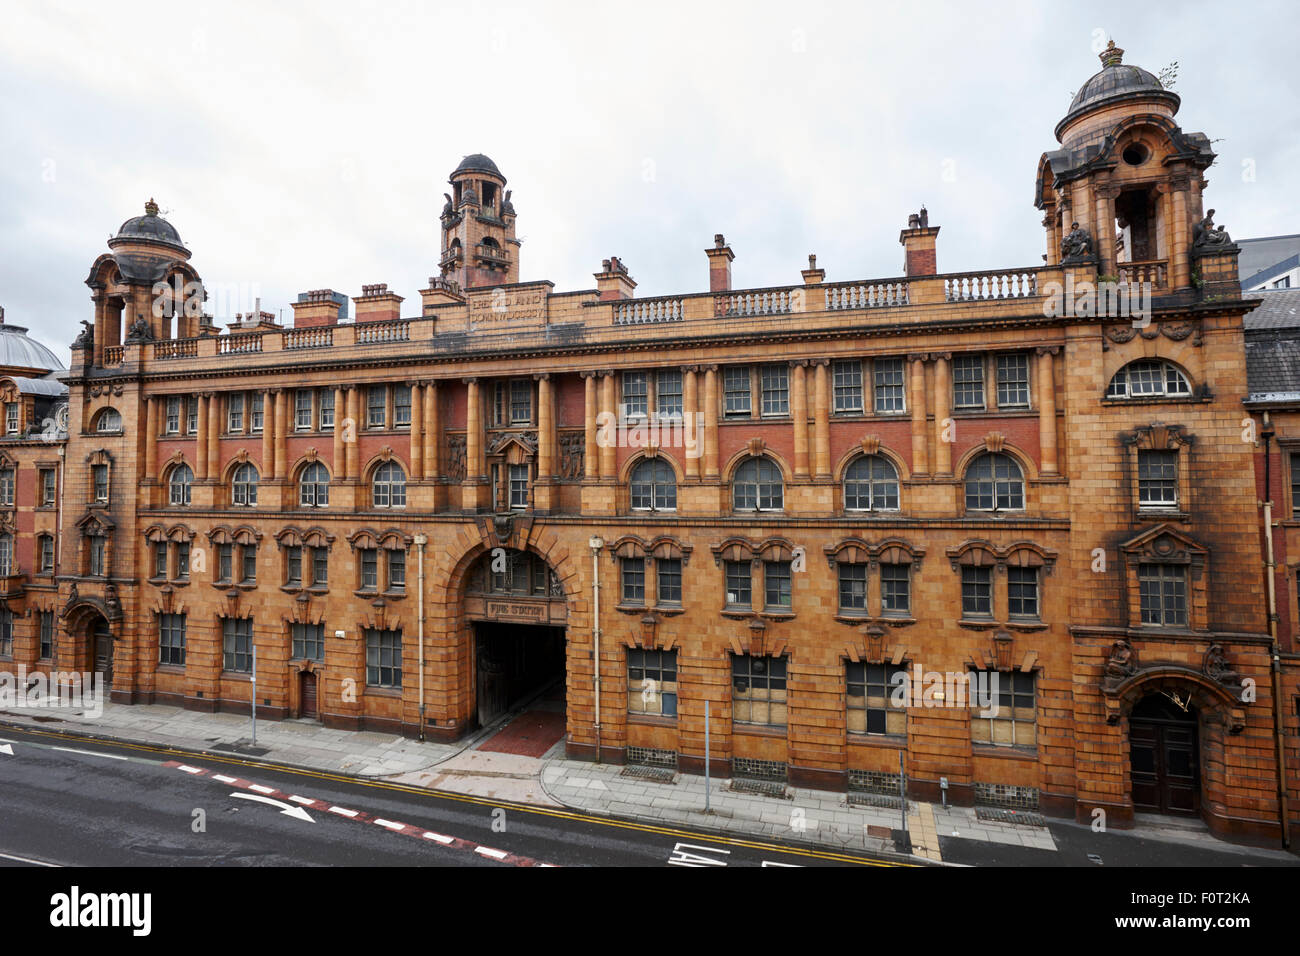 Old fire station building Manchester Inghilterra England Regno Unito Foto Stock